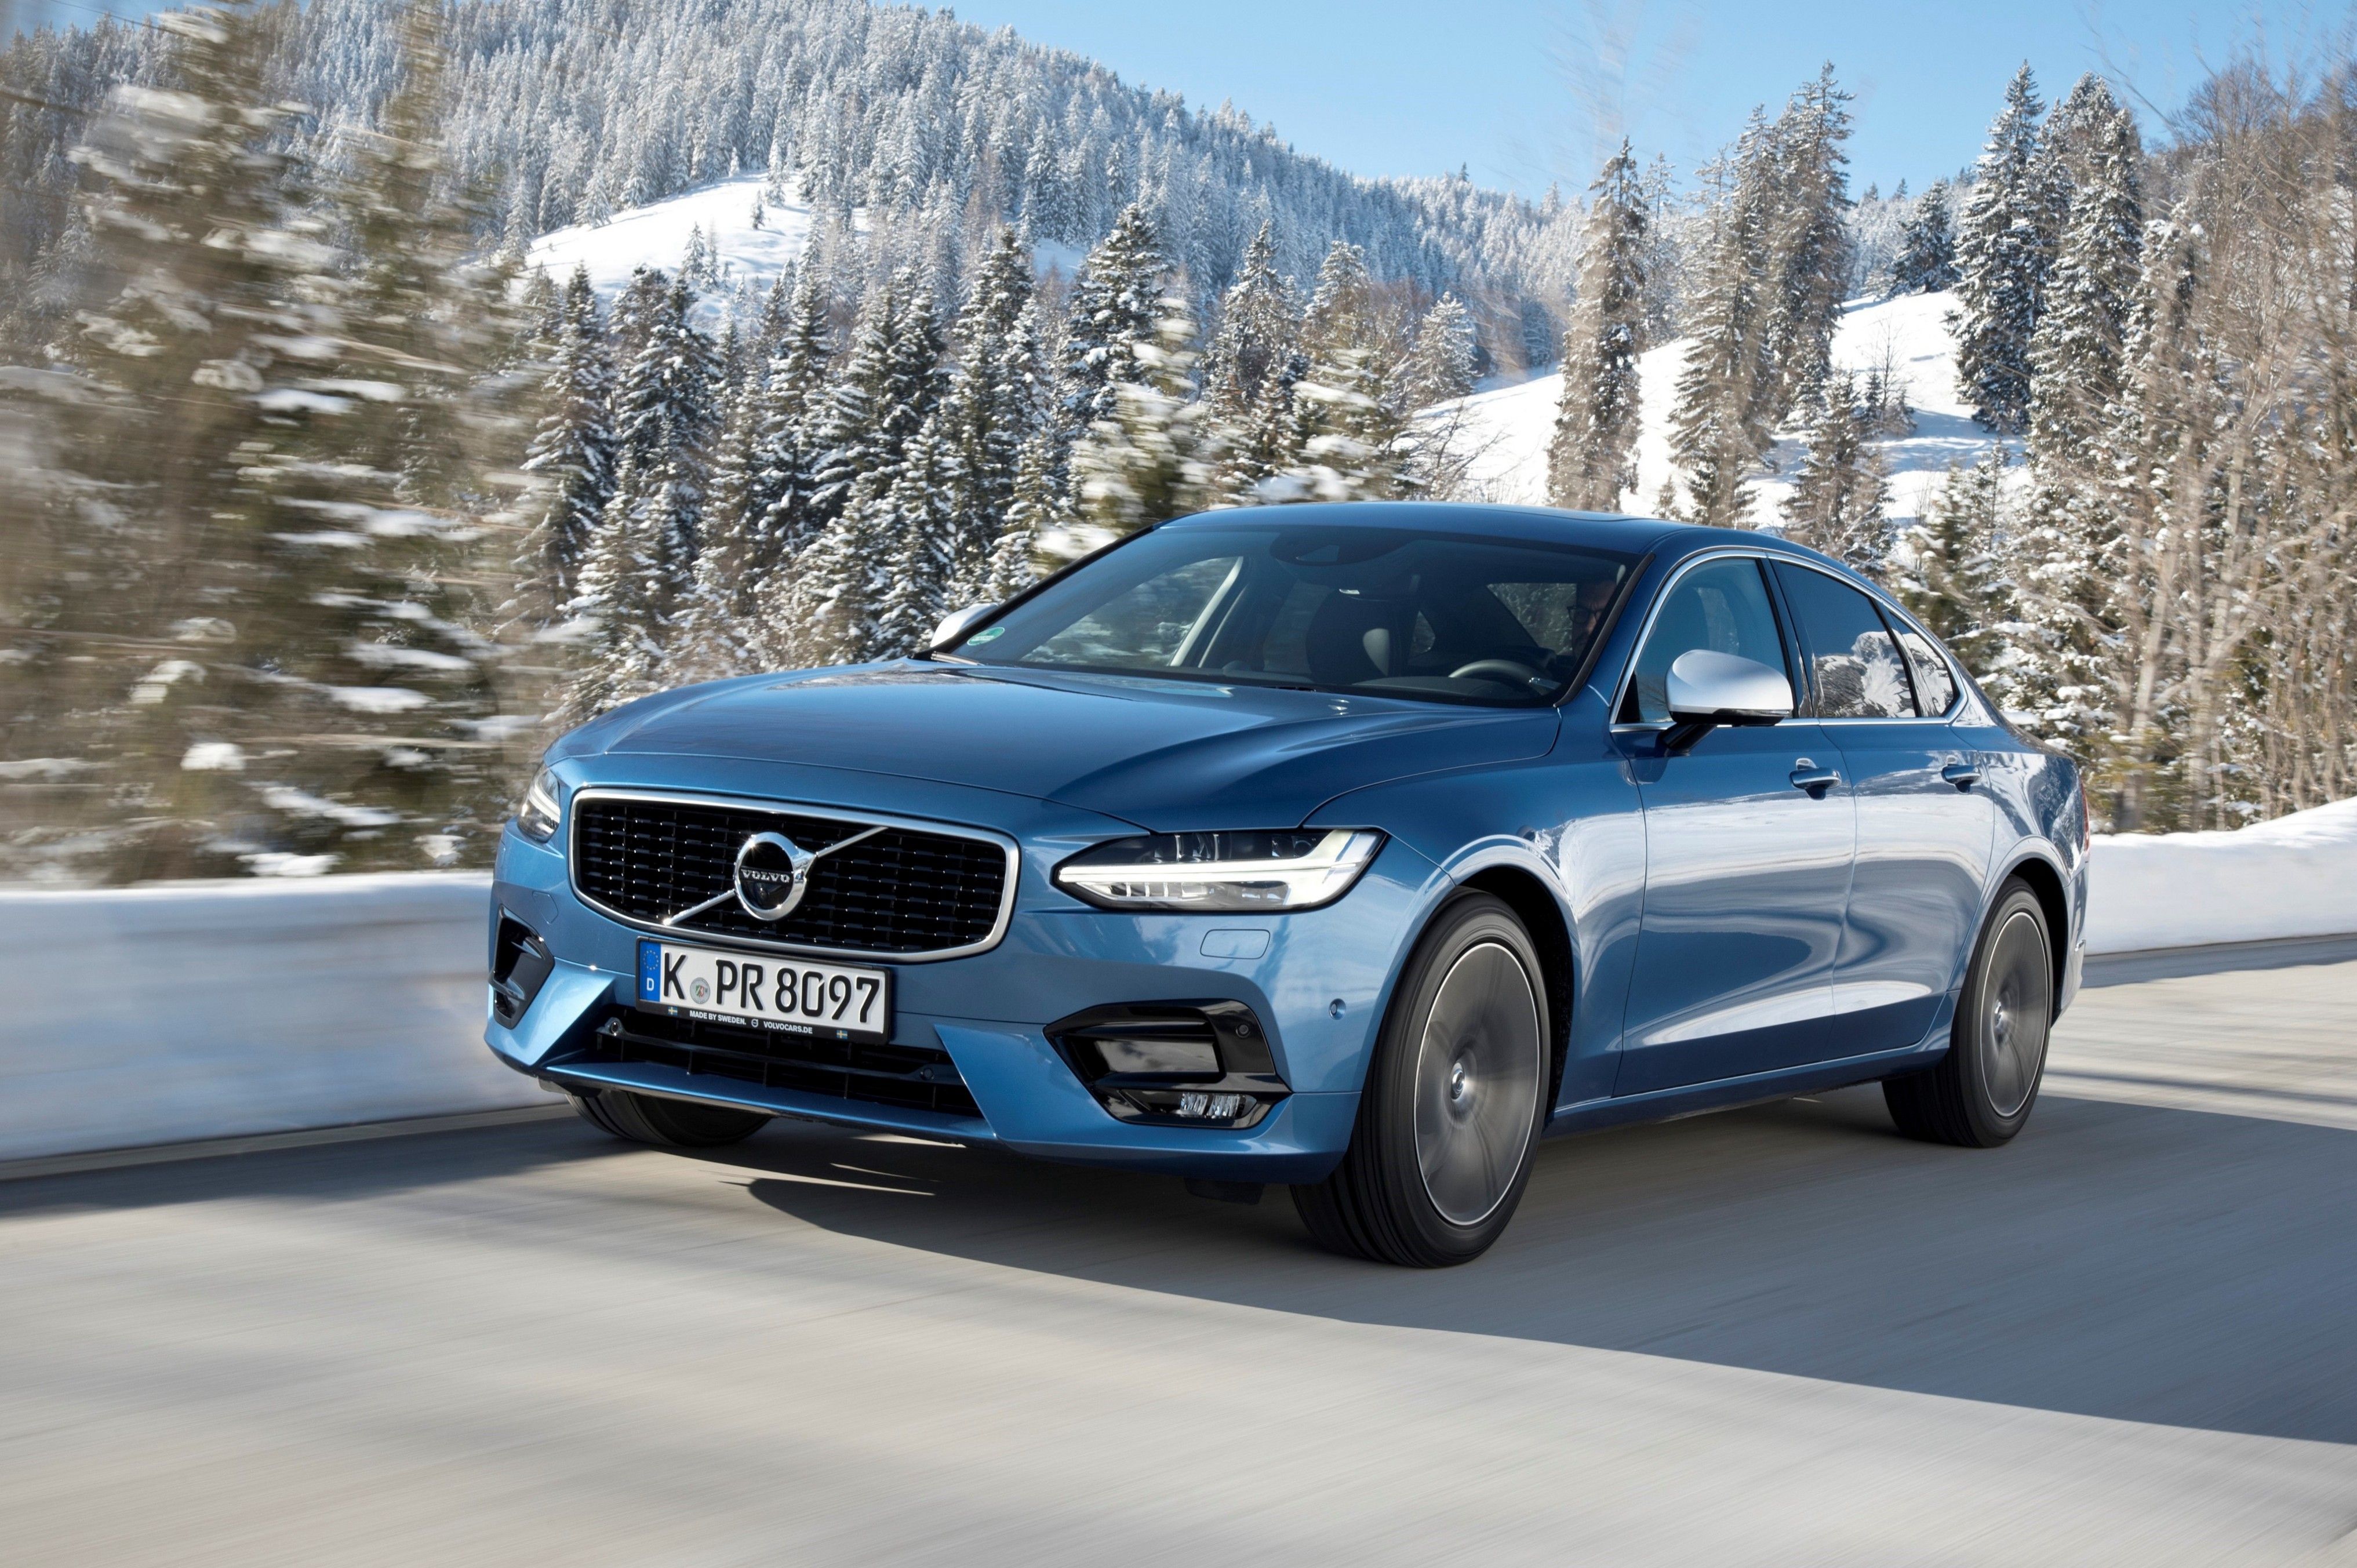 Download 4066x2705 Volvo S Blue, Road, Snow, Luxury, Cars